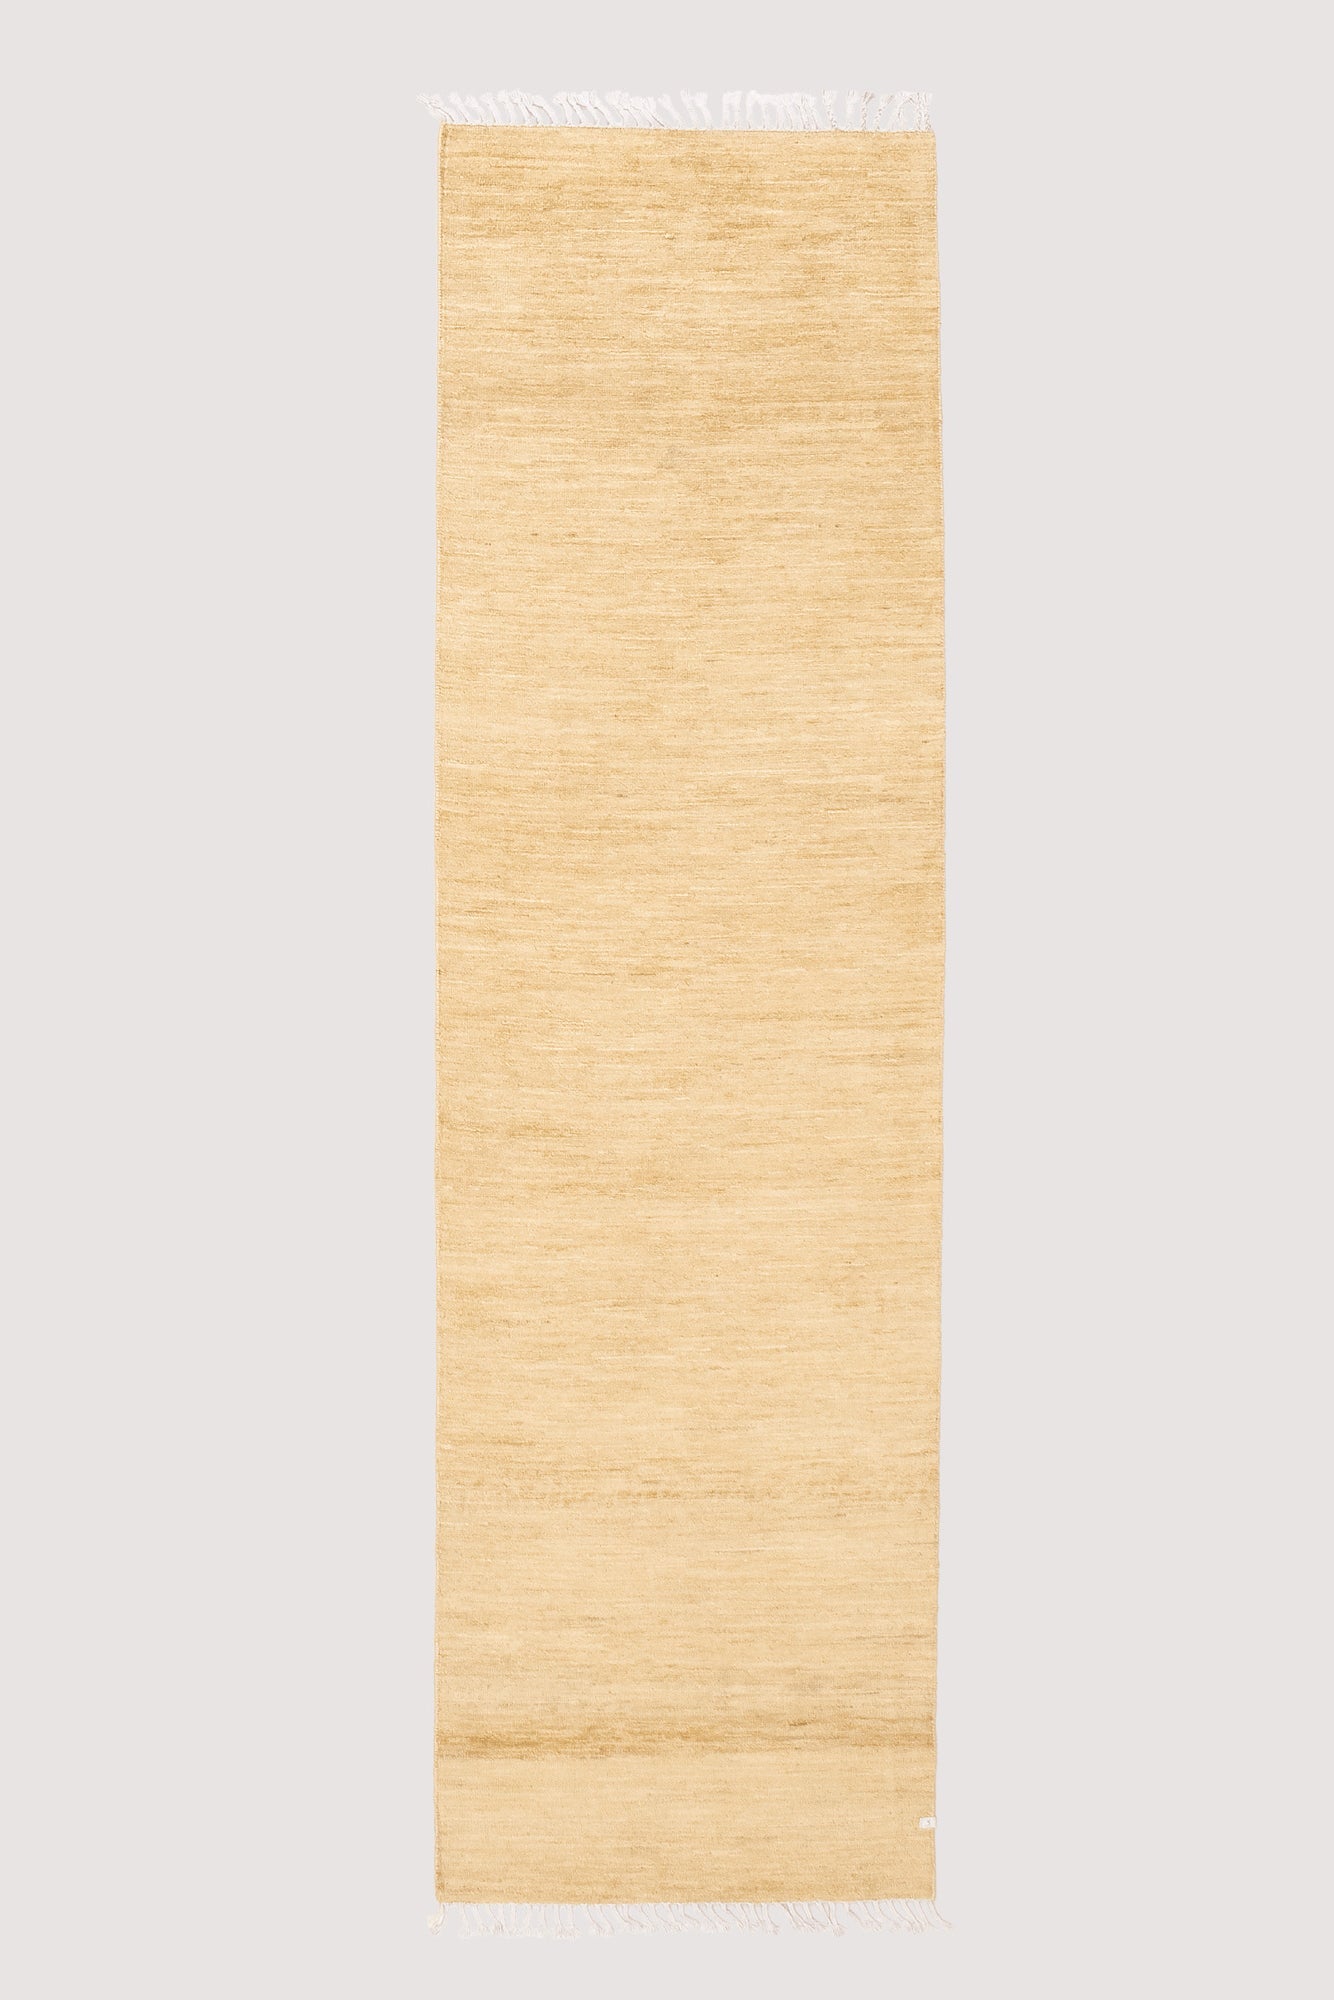 Gabbeh Runner Rug - Parchment 2'9" x 10'0" Rugs